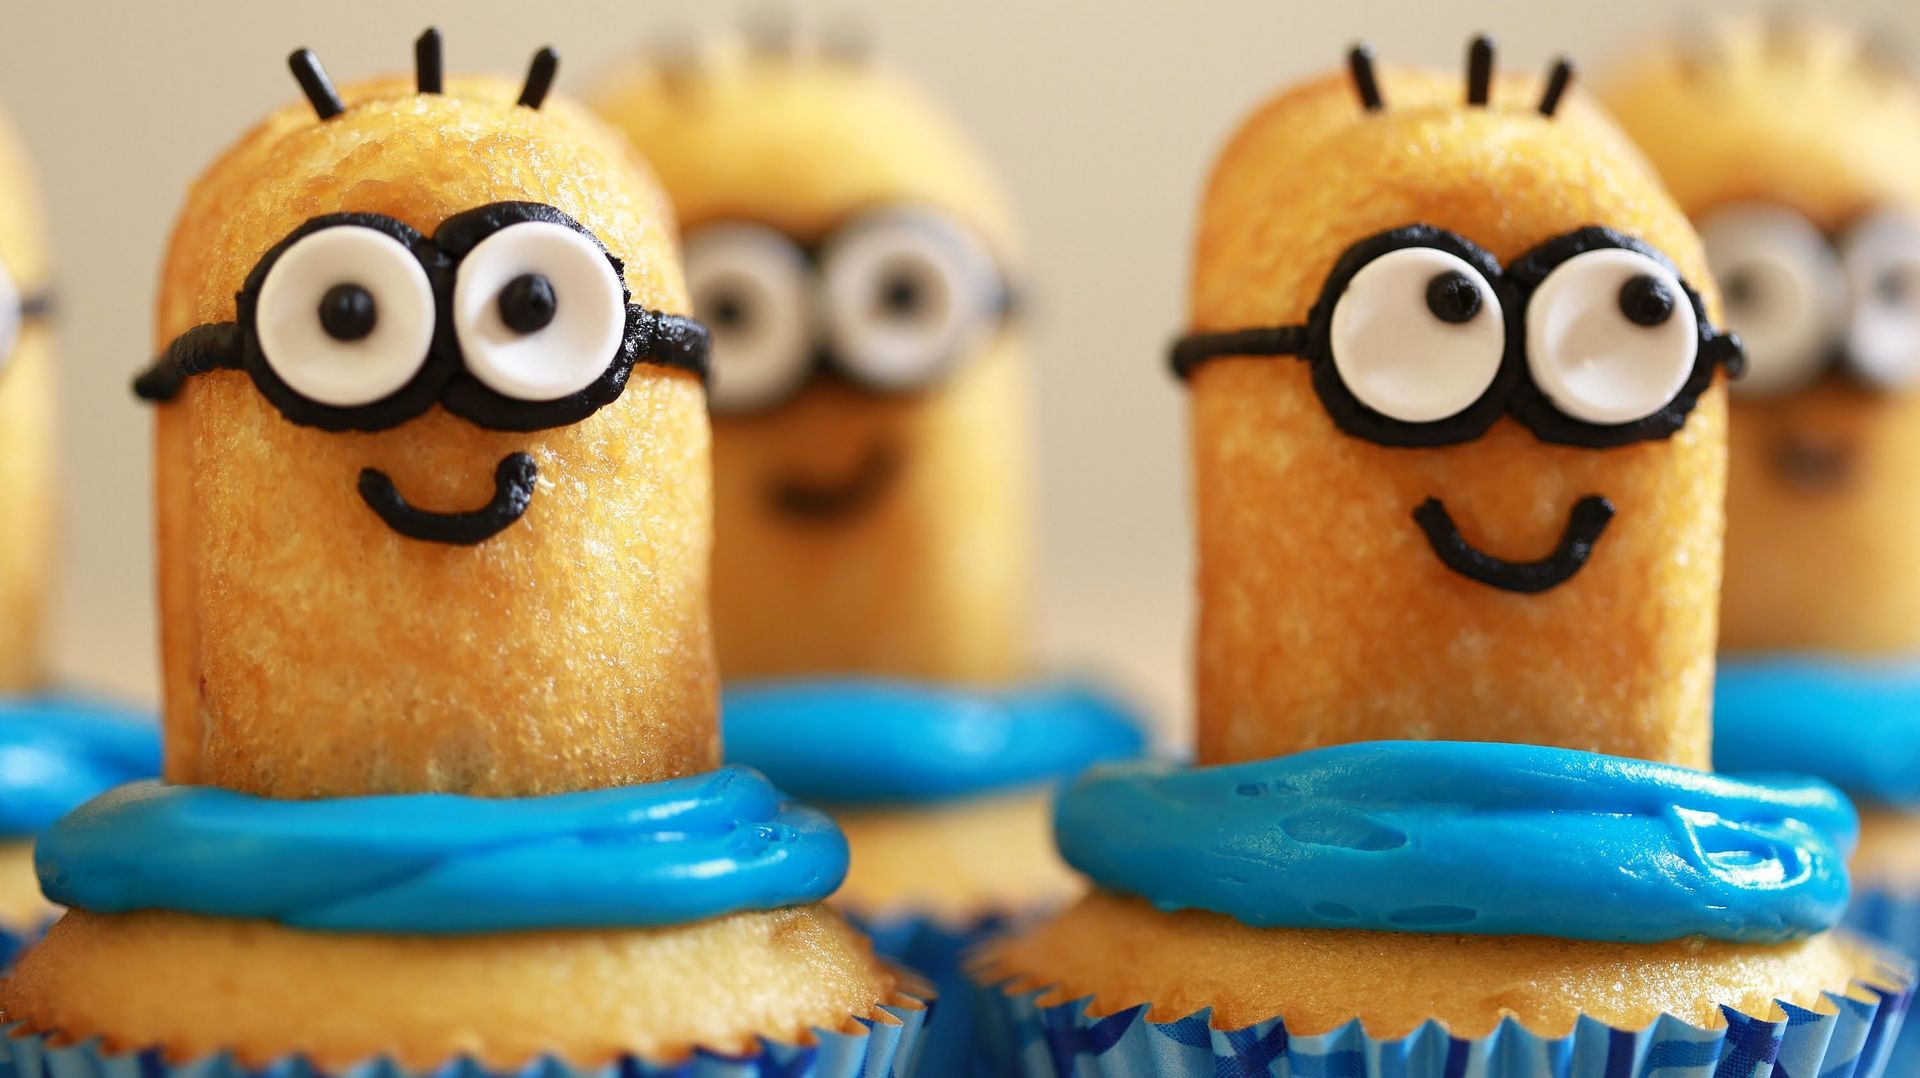 Minions treat recipes: Minions cupcakes made with Twikines | Nerdy Nummies